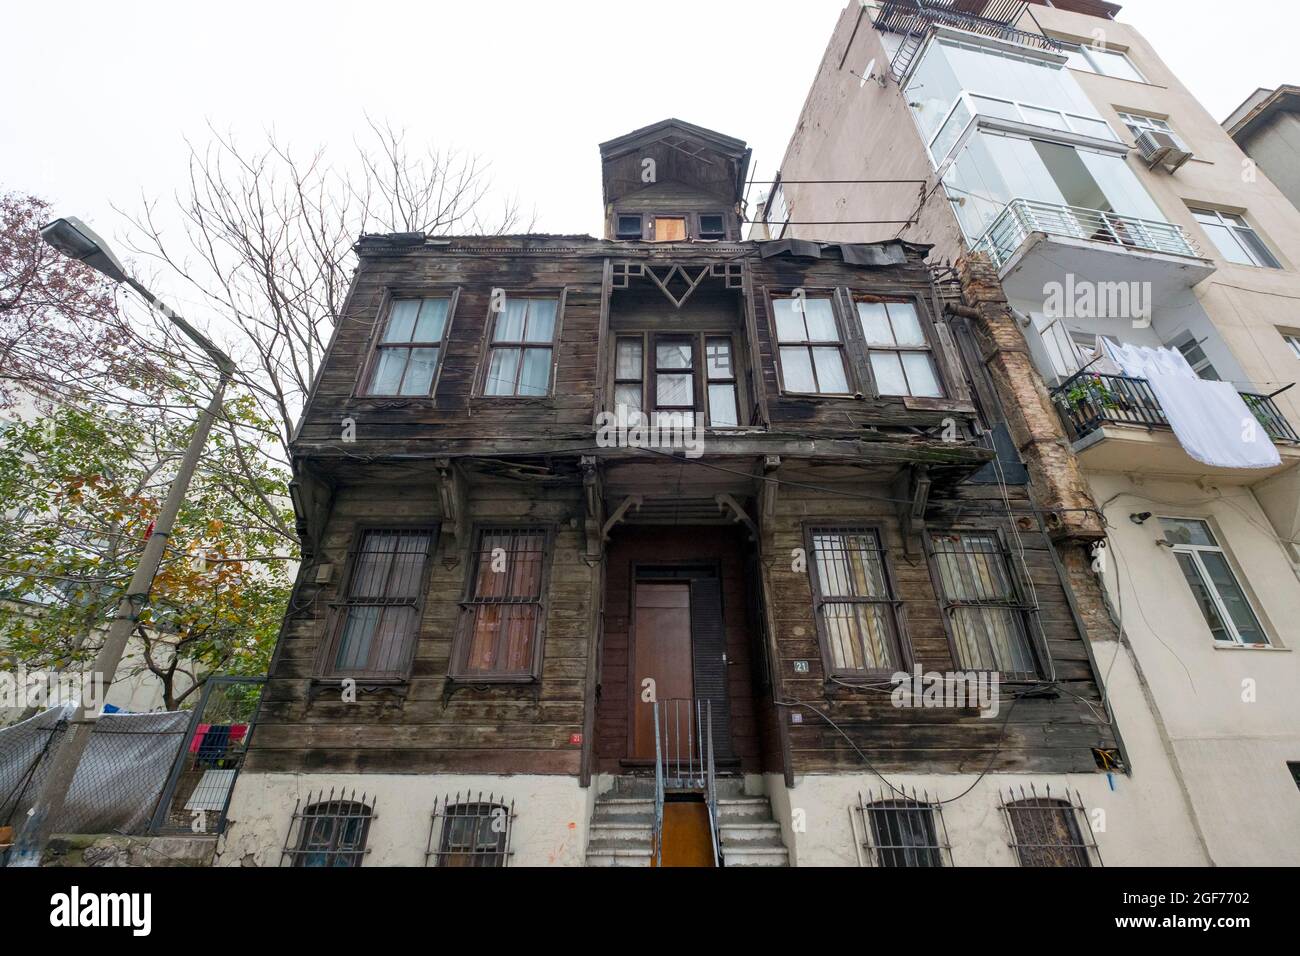 An example of a typical old, poor, worn, falling apart, unpainted, wood siding apartment building in a local neighborhood. In Istanbul, Turkey. Stock Photo